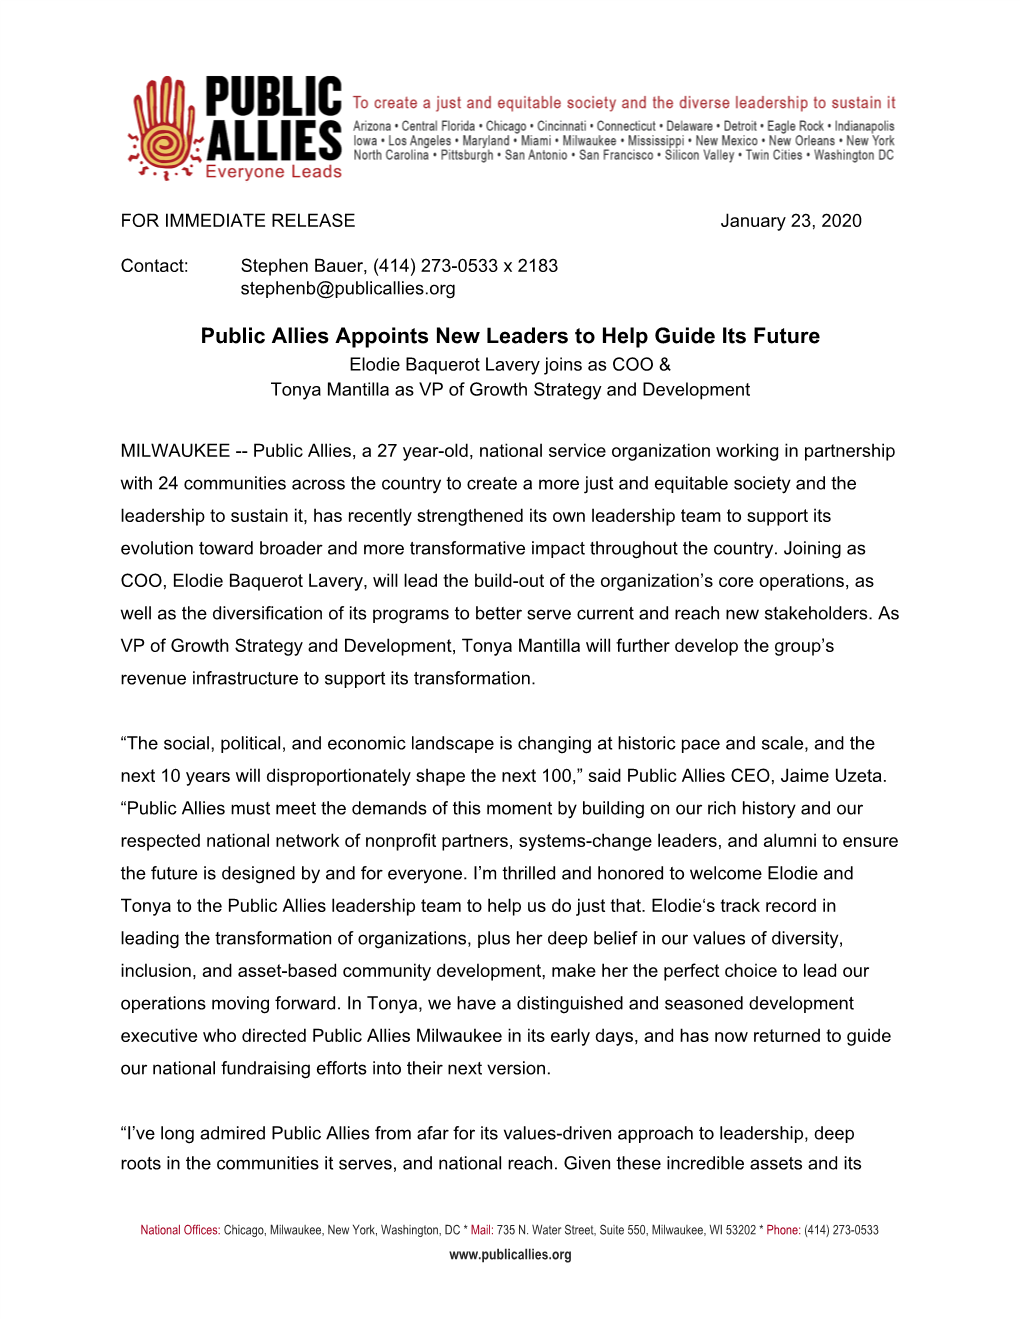 Public Allies Appoints New Leaders to Help Guide Its Future Elodie Baquerot Lavery Joins As COO & Tonya Mantilla As VP of Growth Strategy and Development